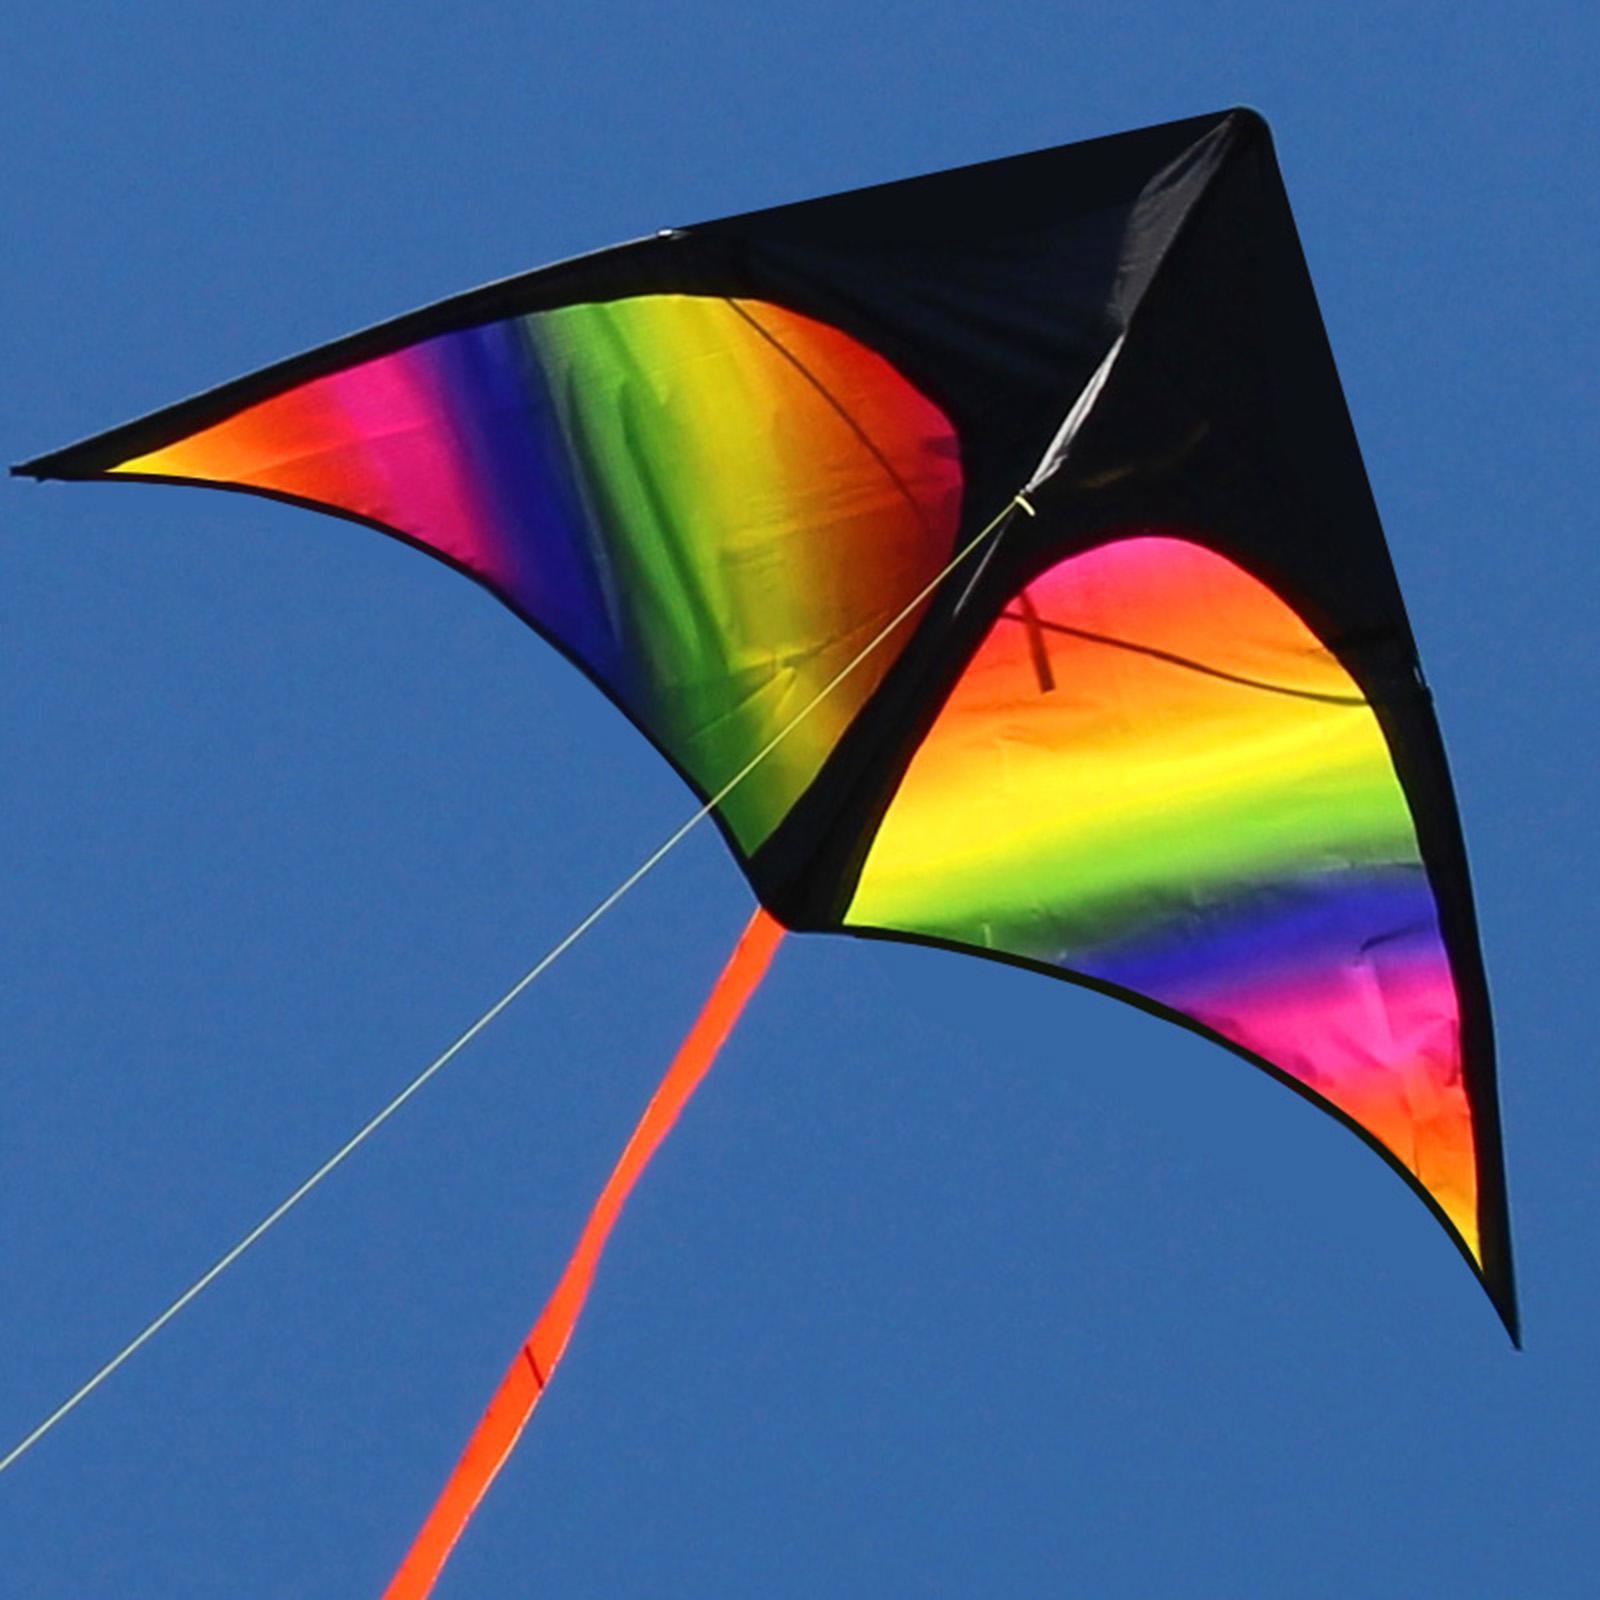 Delta  Kite Triangle Kite Huge  for Beach Kids Adults Games